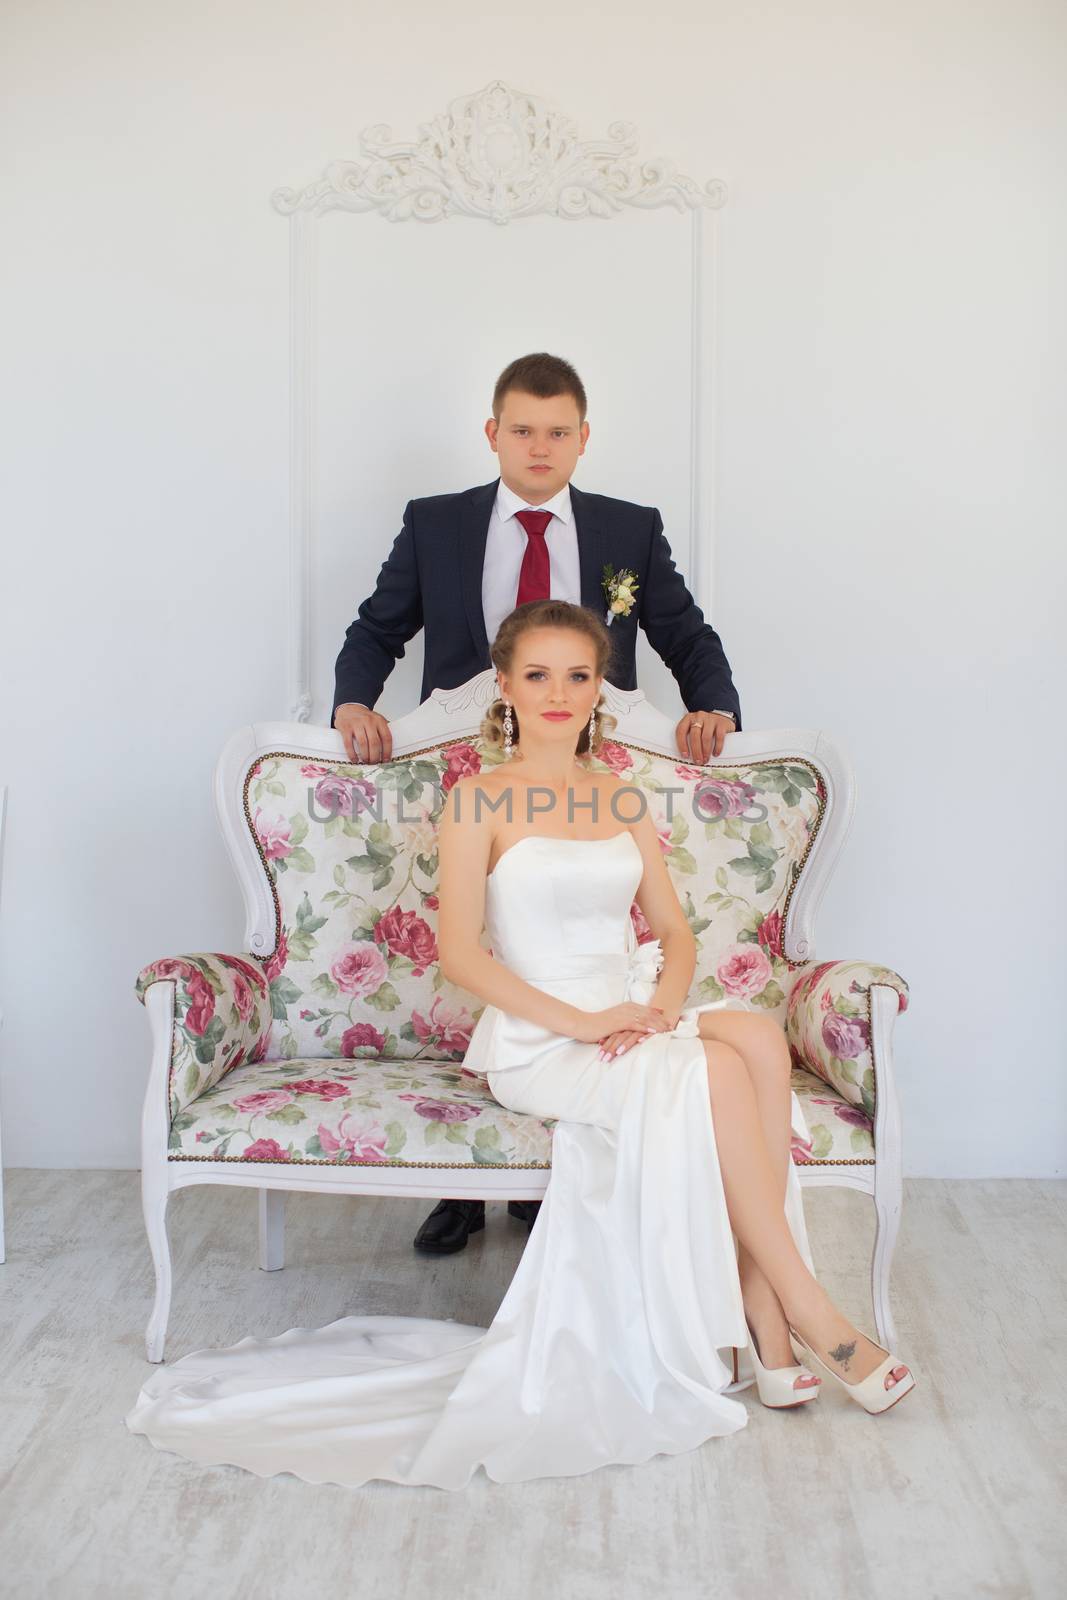 Stylish newlyweds posing for photography at the apartment